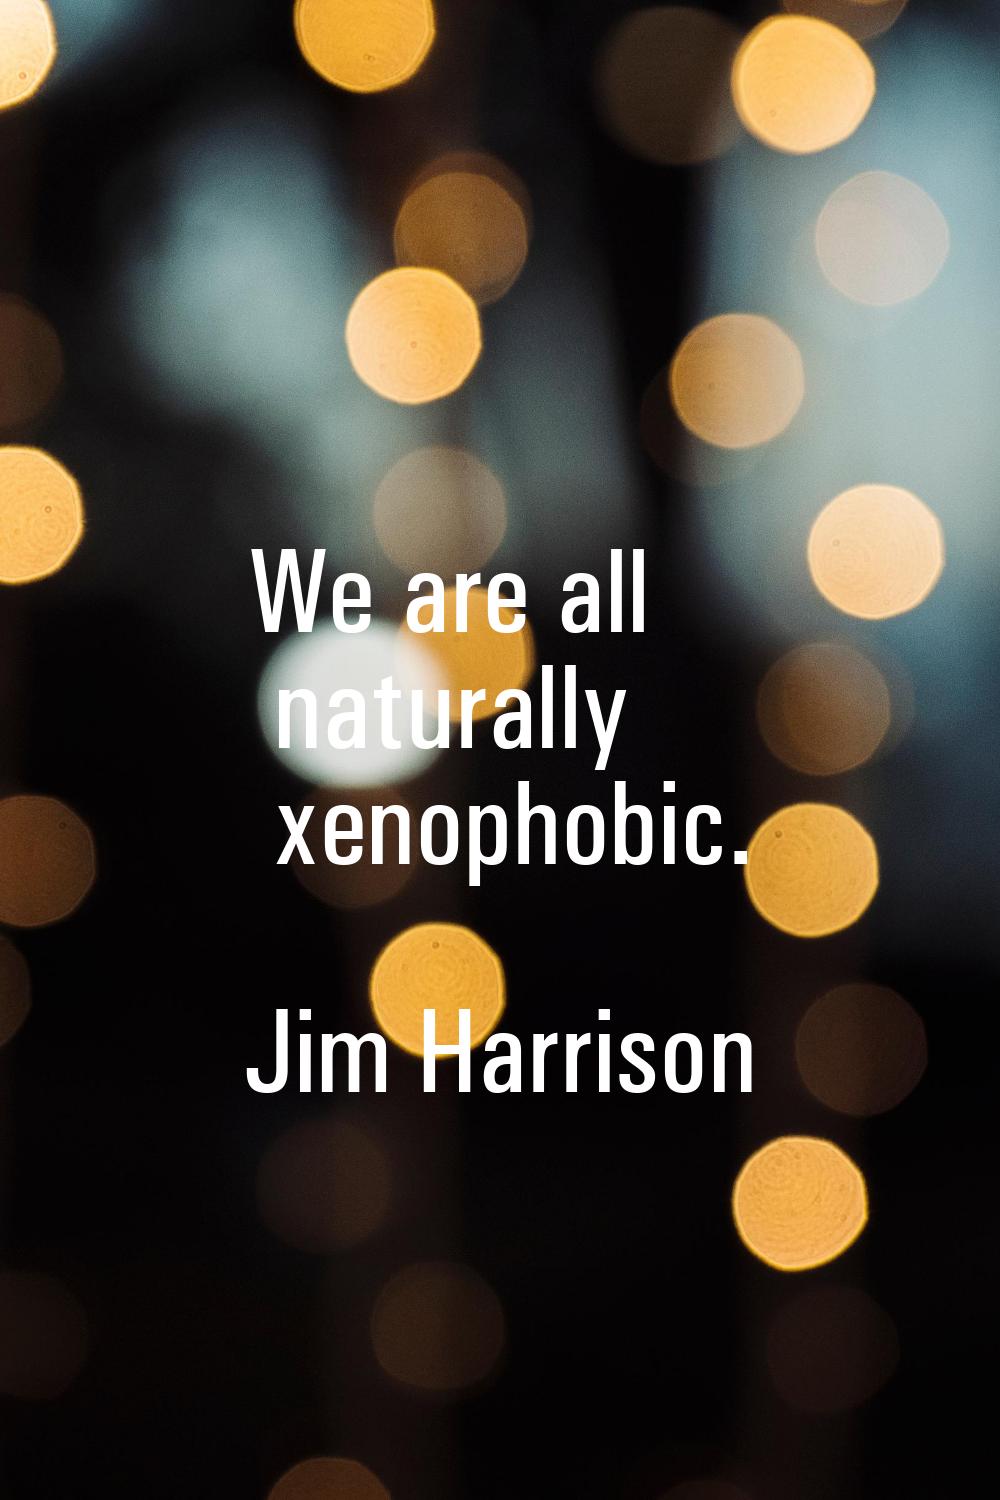 We are all naturally xenophobic.